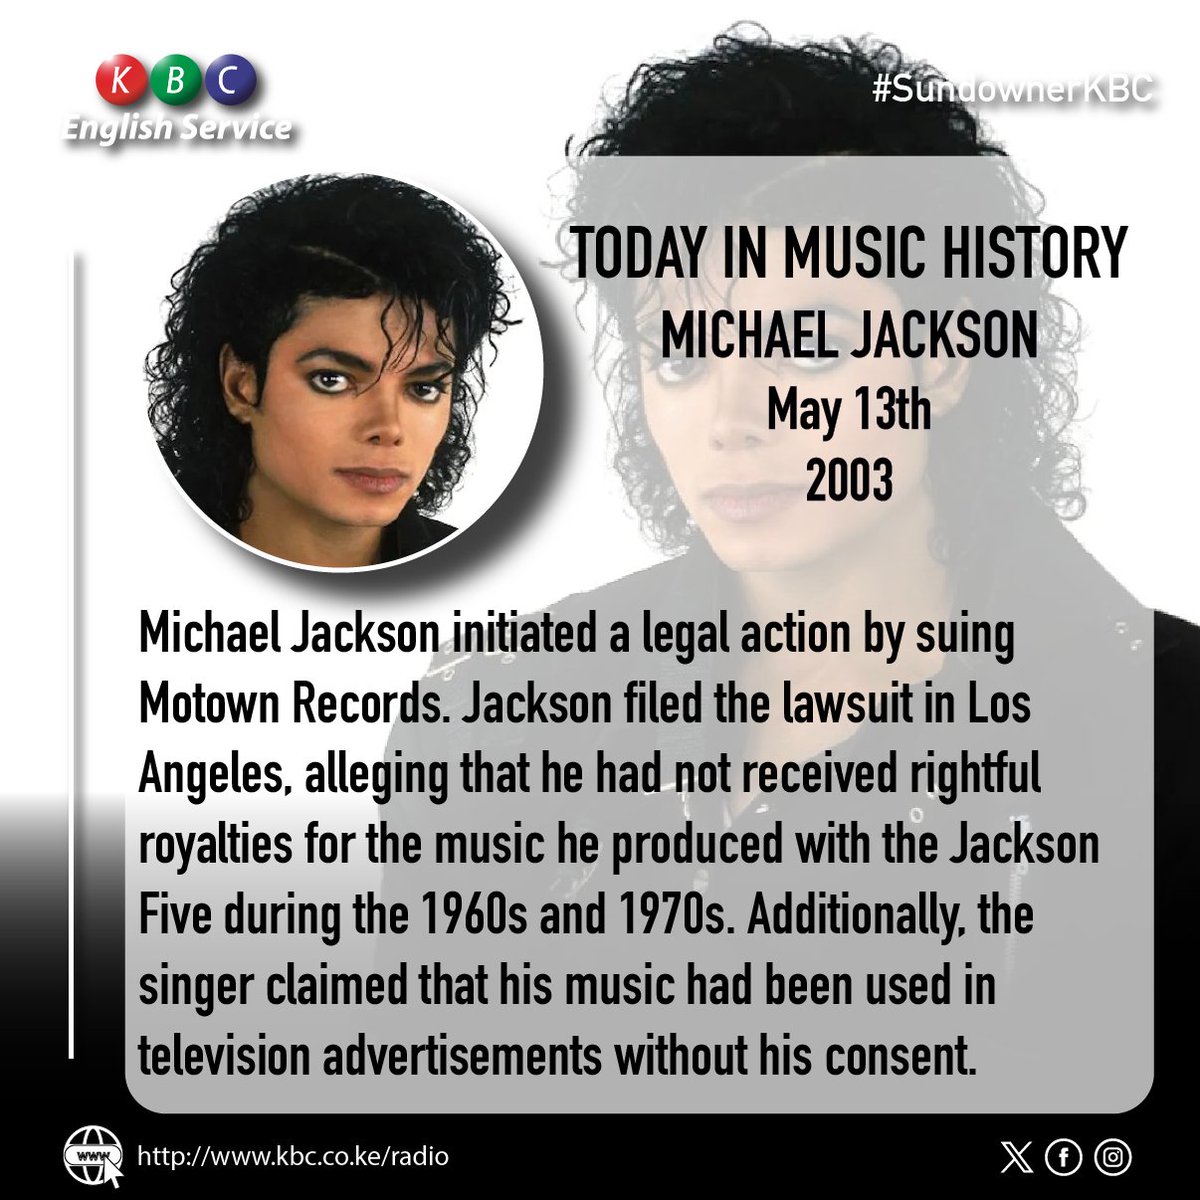 Today in Music History: 13th May 2003 Michael Jackson initiated a legal action by suing Motown Records... ^PMN #SundownerKBC